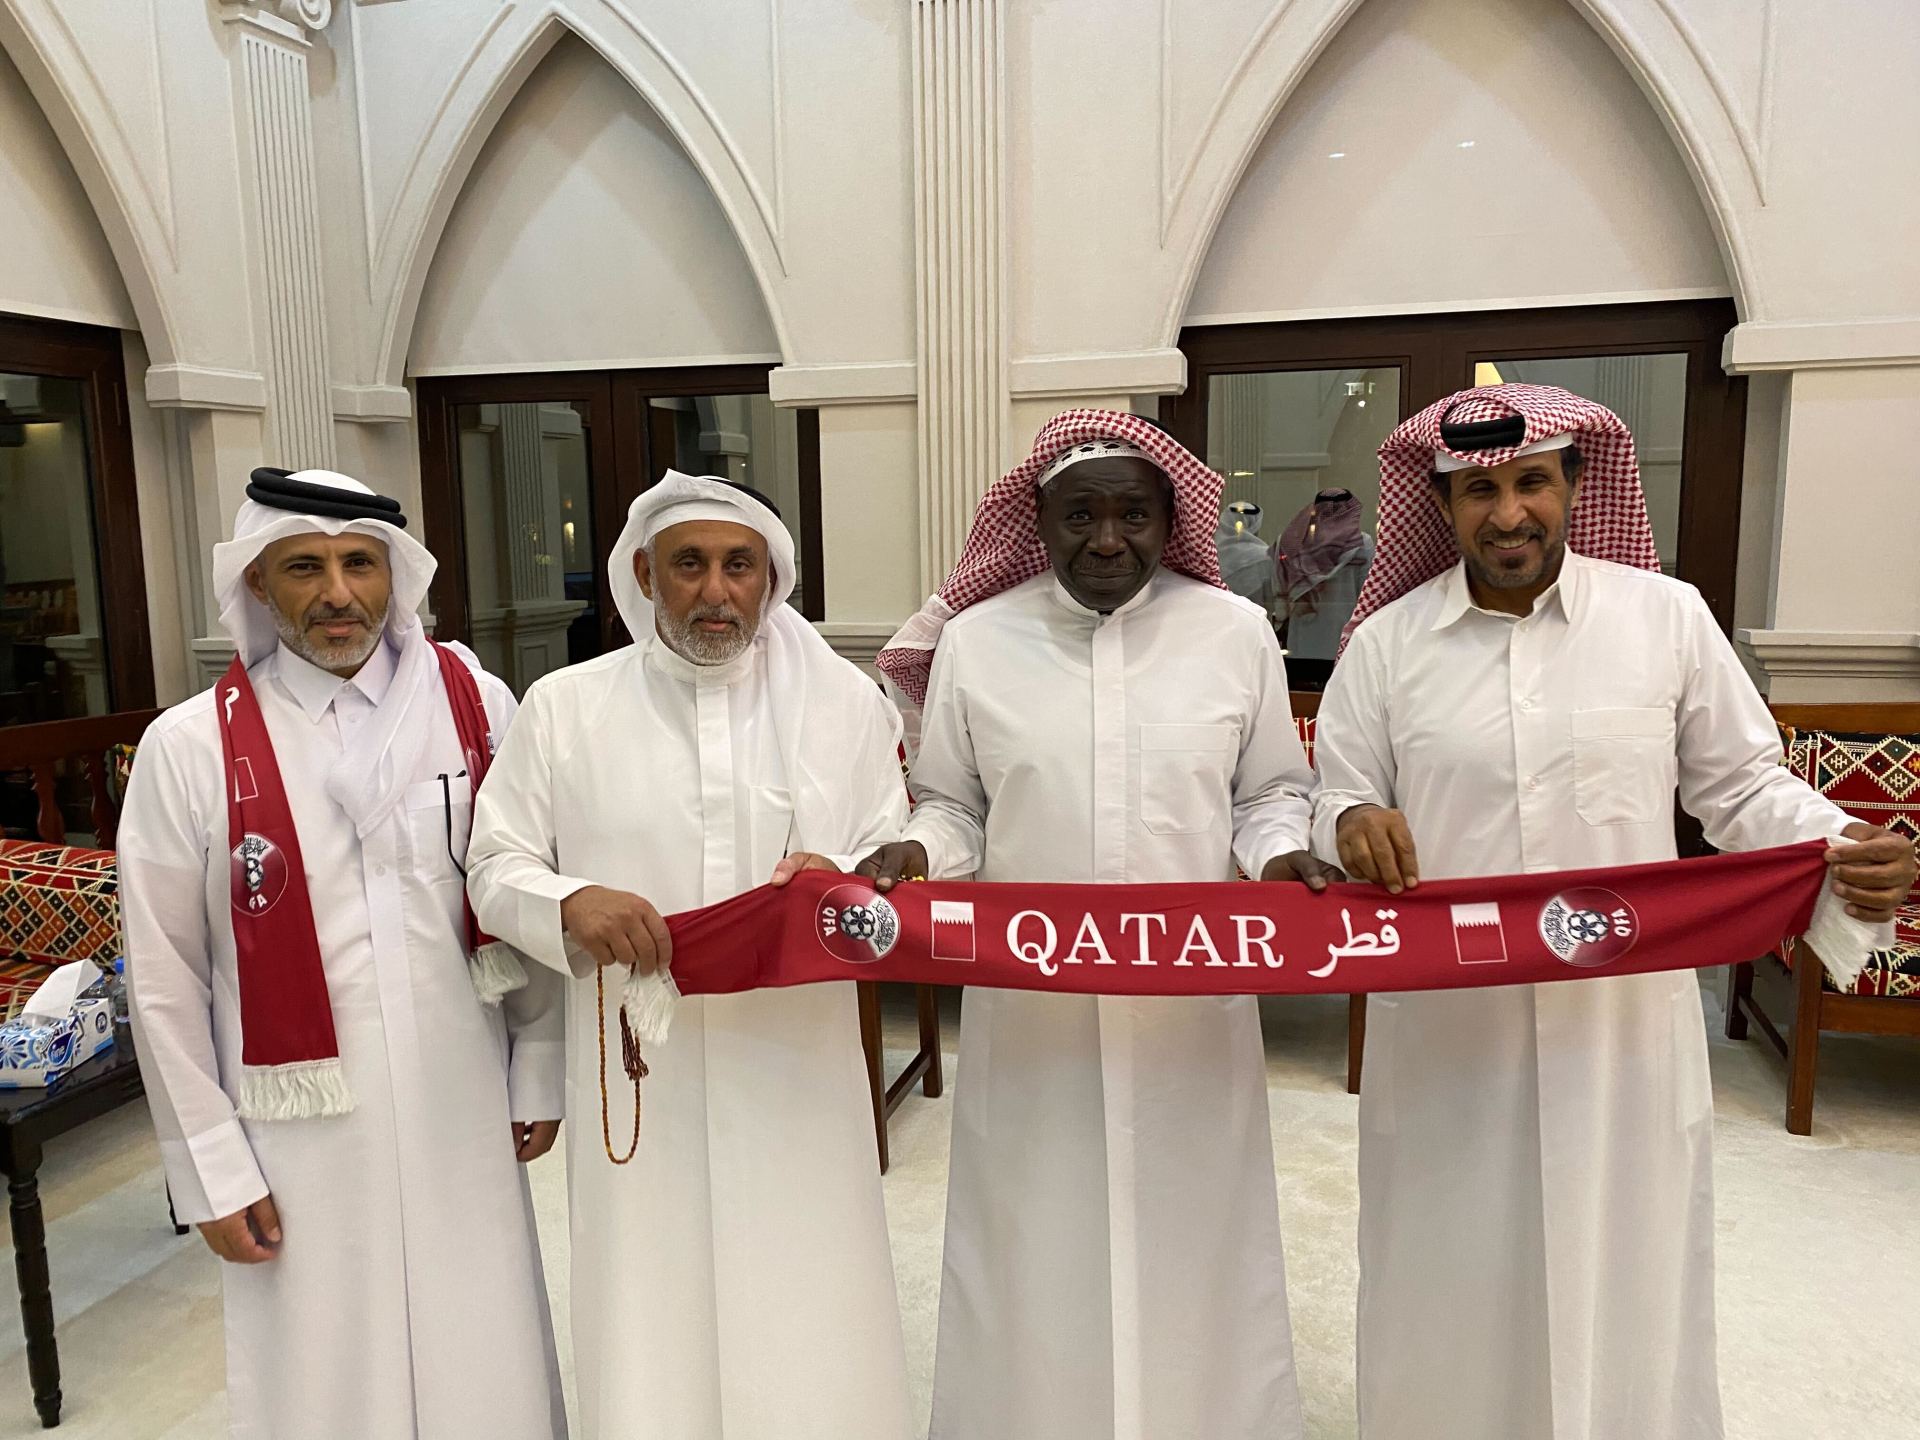 Reflecting on a modern Qatar during a World Cup game with friends | Qatar World Cup 2022